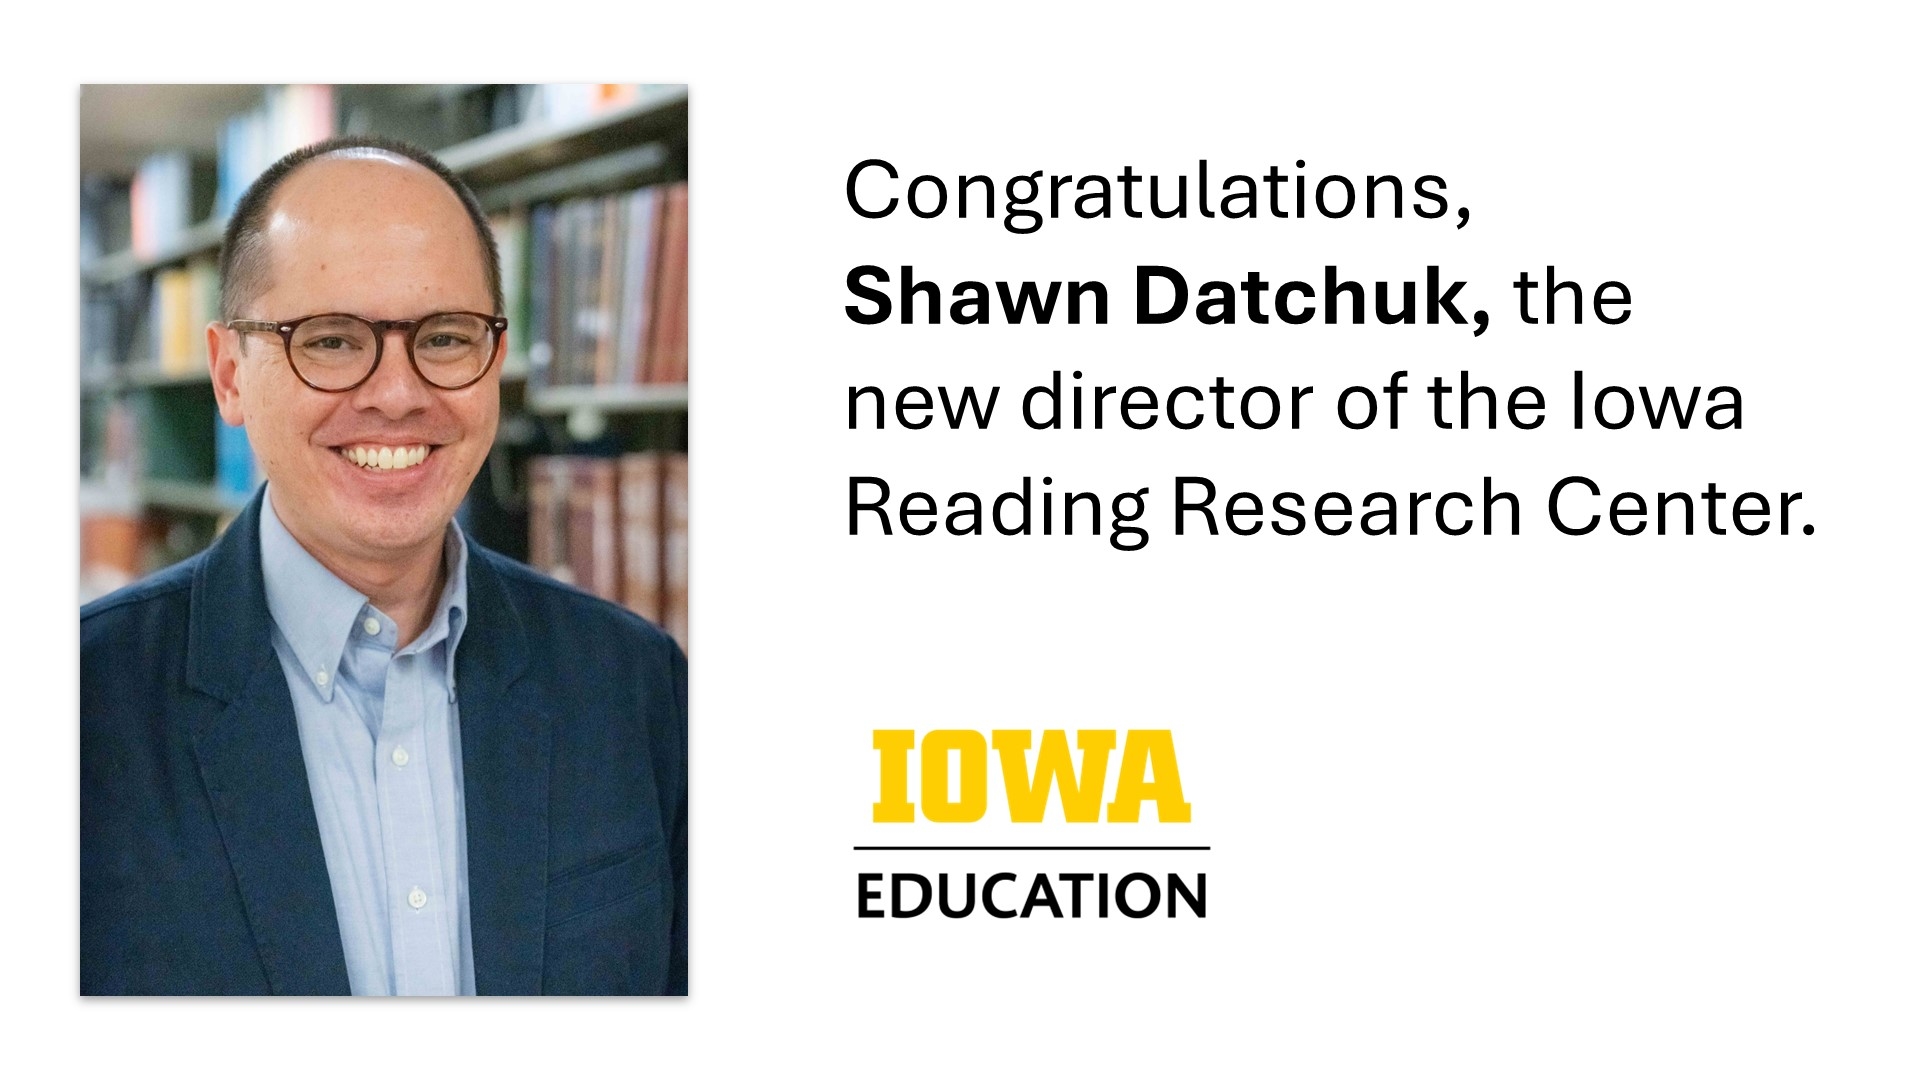 Congratulations,  Shawn Datchuk, the new director of the Iowa Reading Research Center.